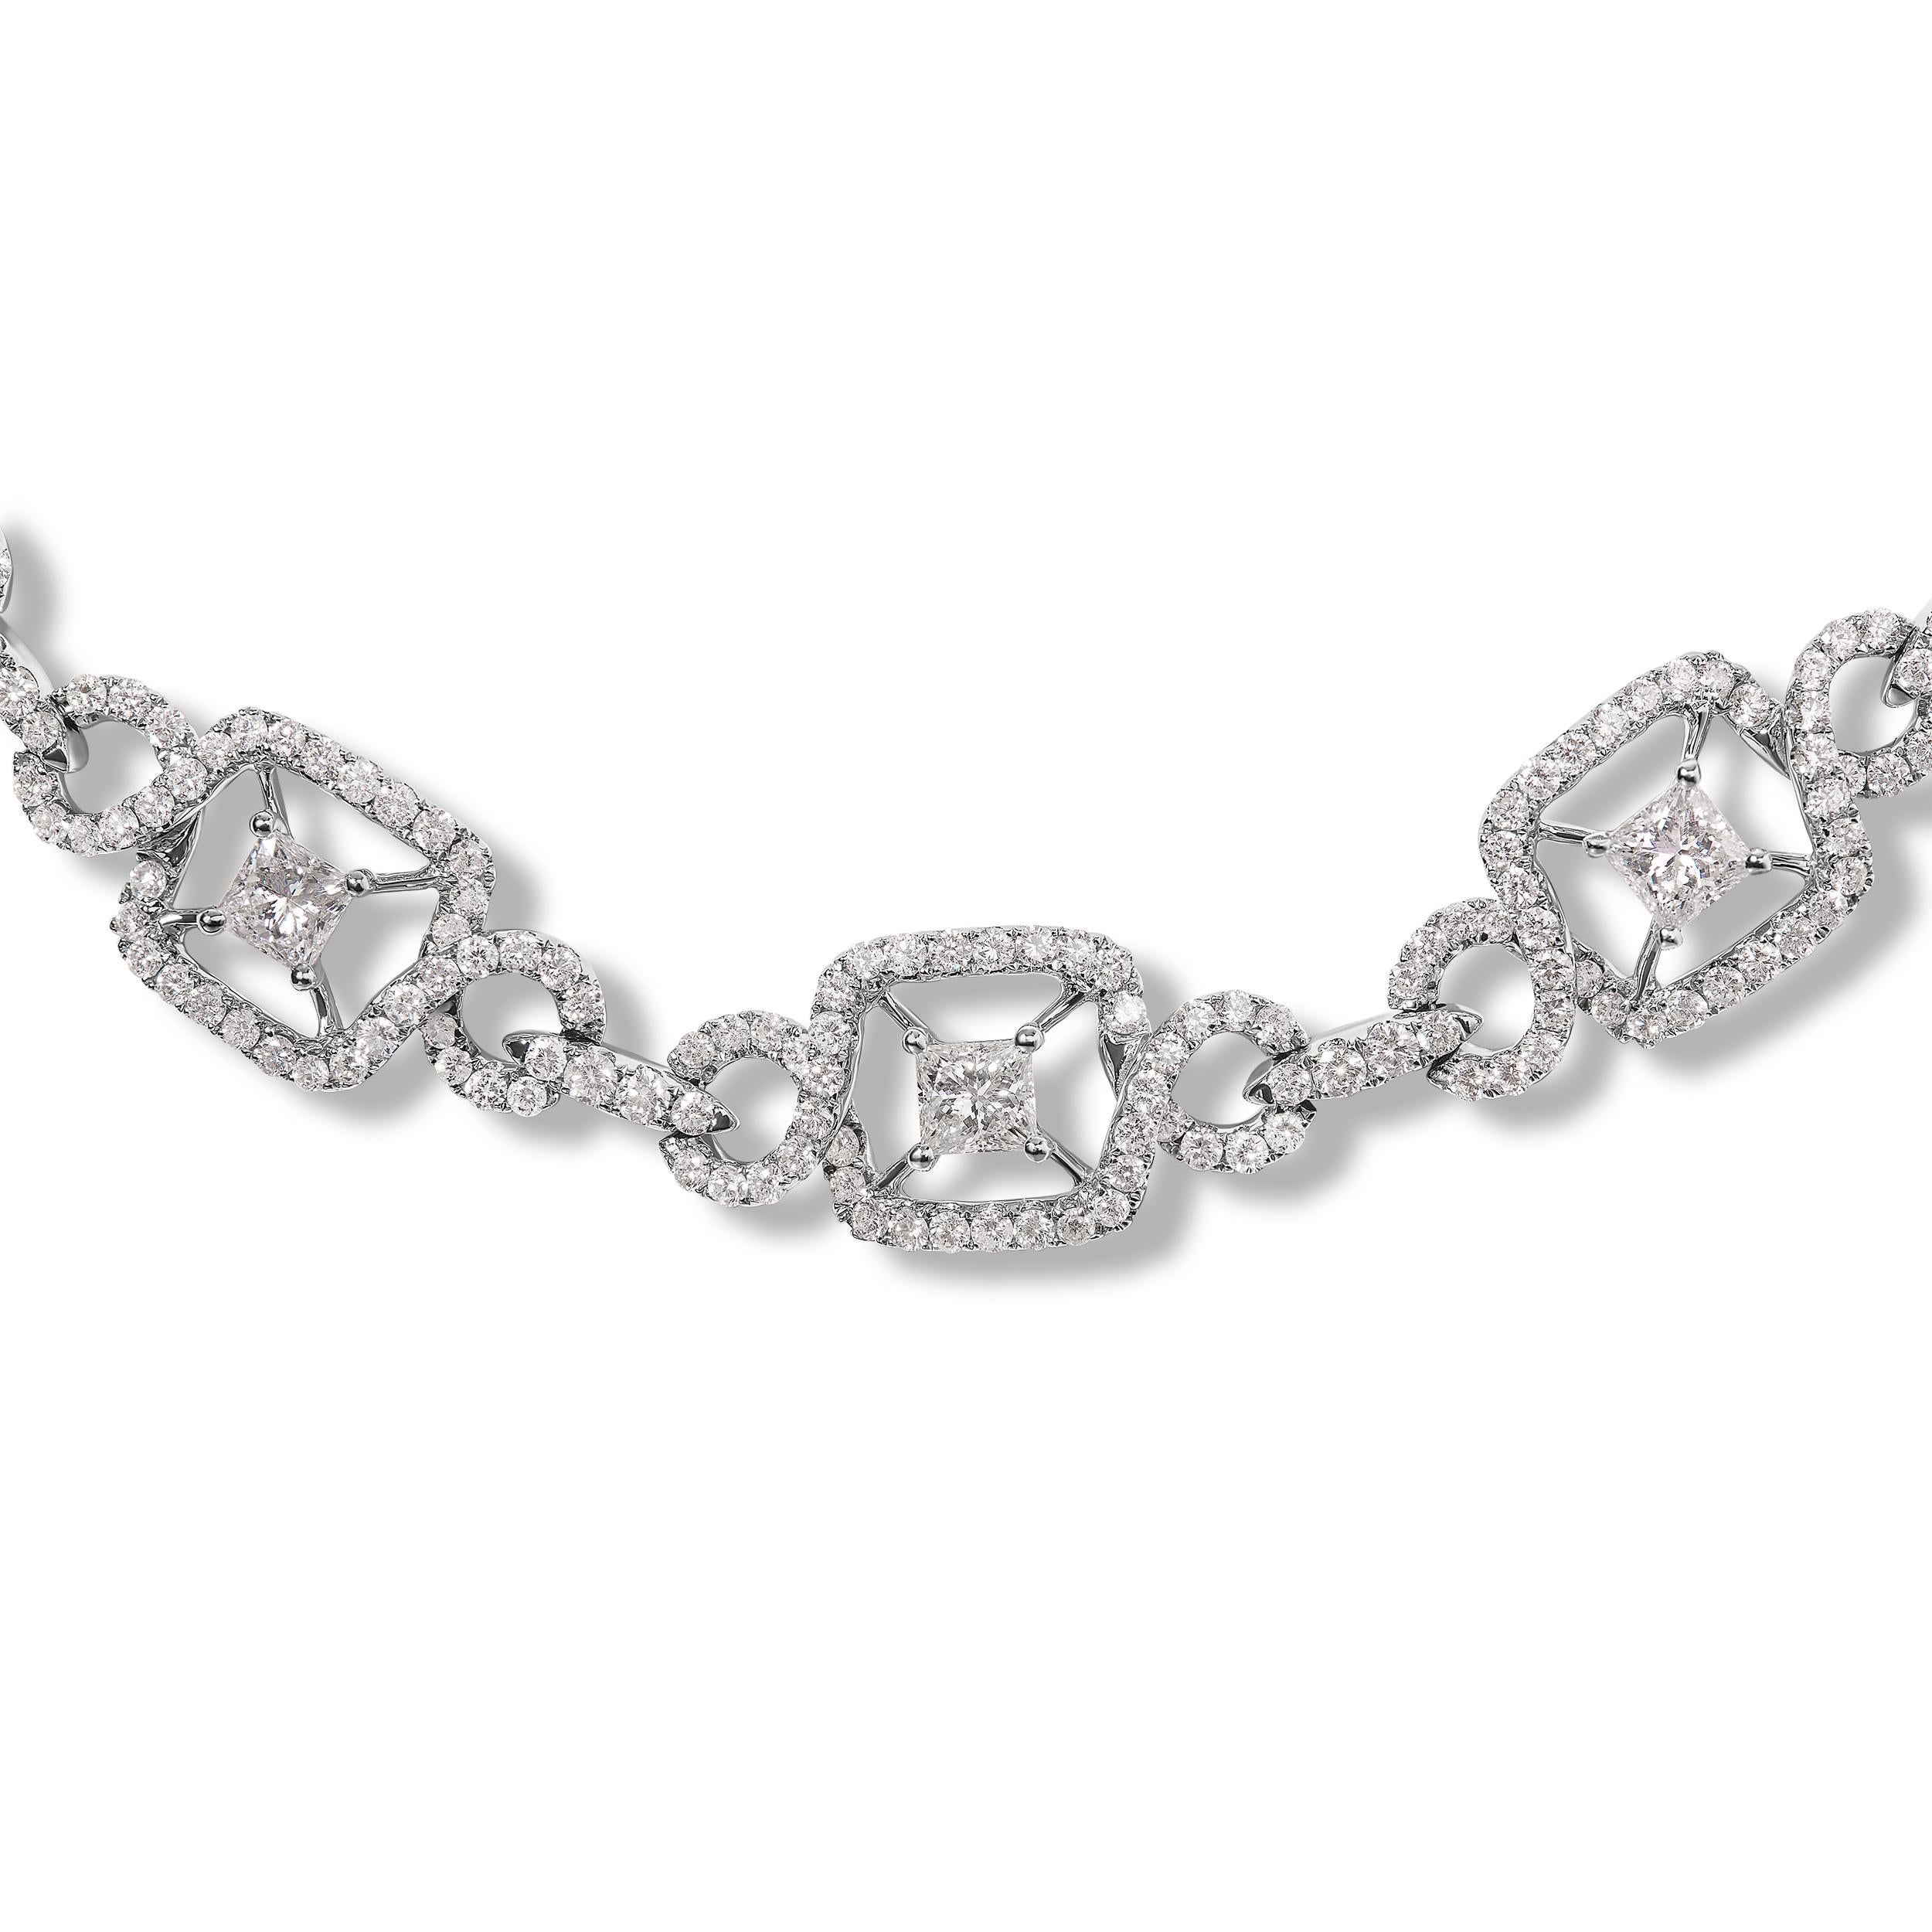 Introducing an exquisite masterpiece that will leave you breathless - an 18K White Gold 